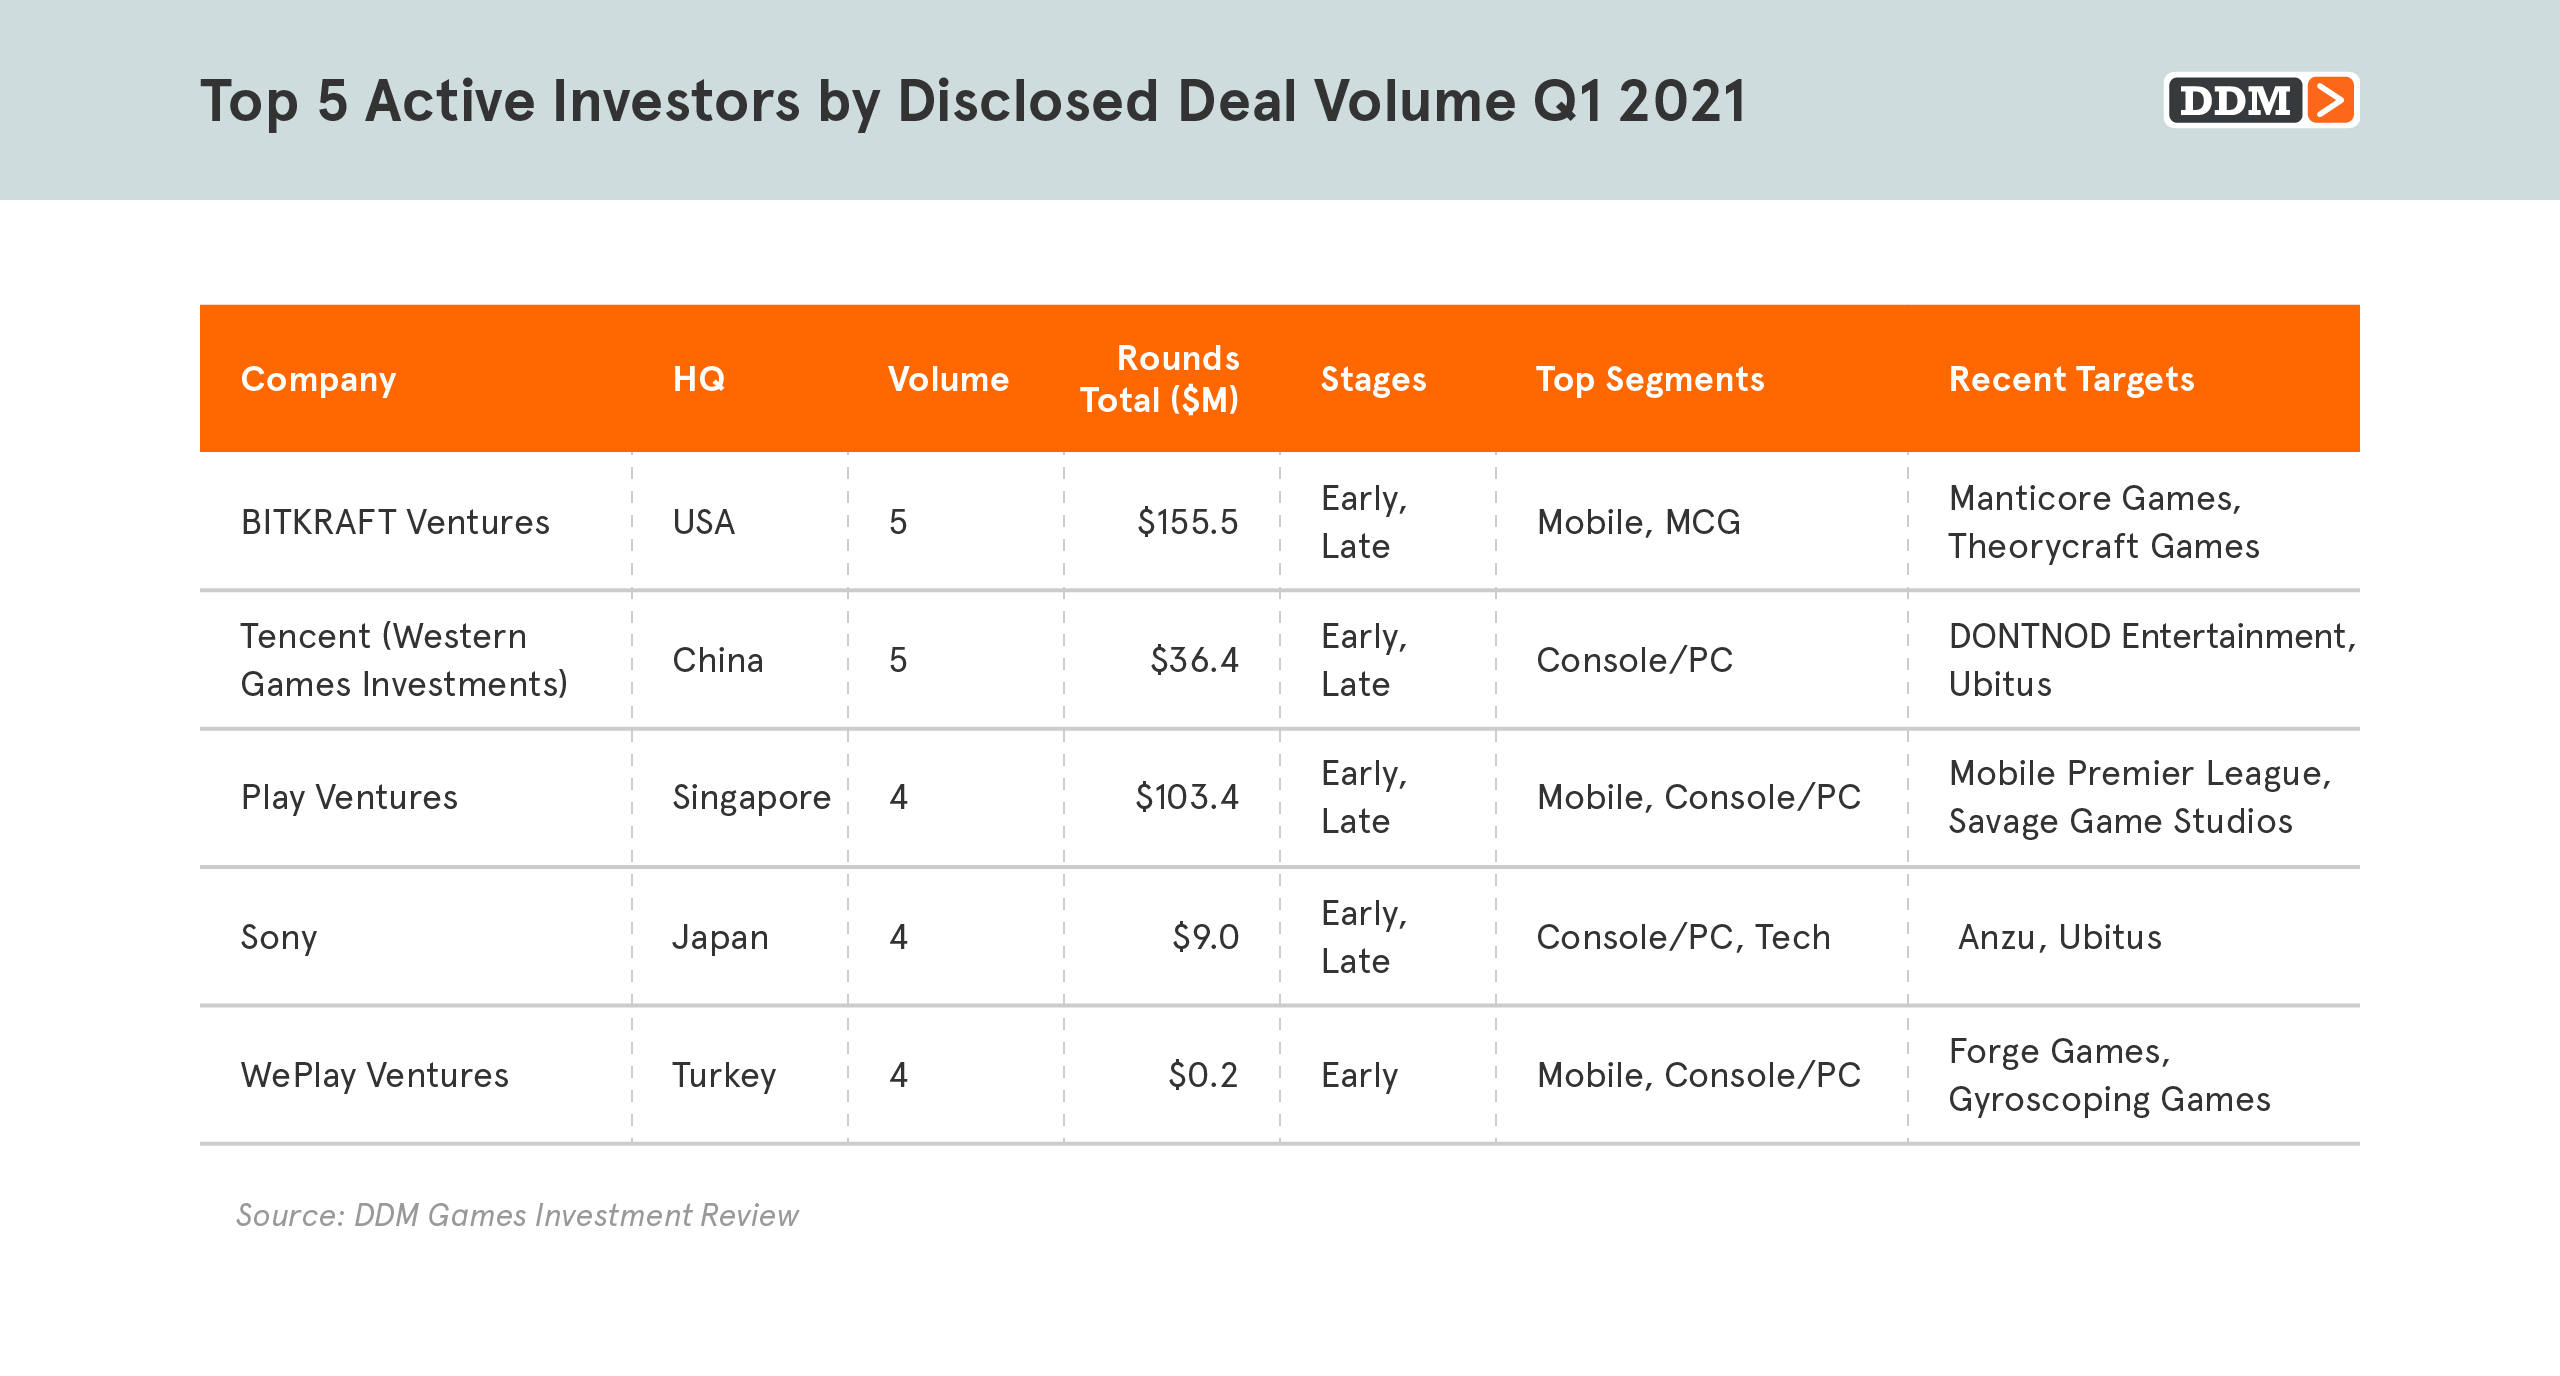 Top 5 Active Investors by Disclosed Deal Volume Q1 2021